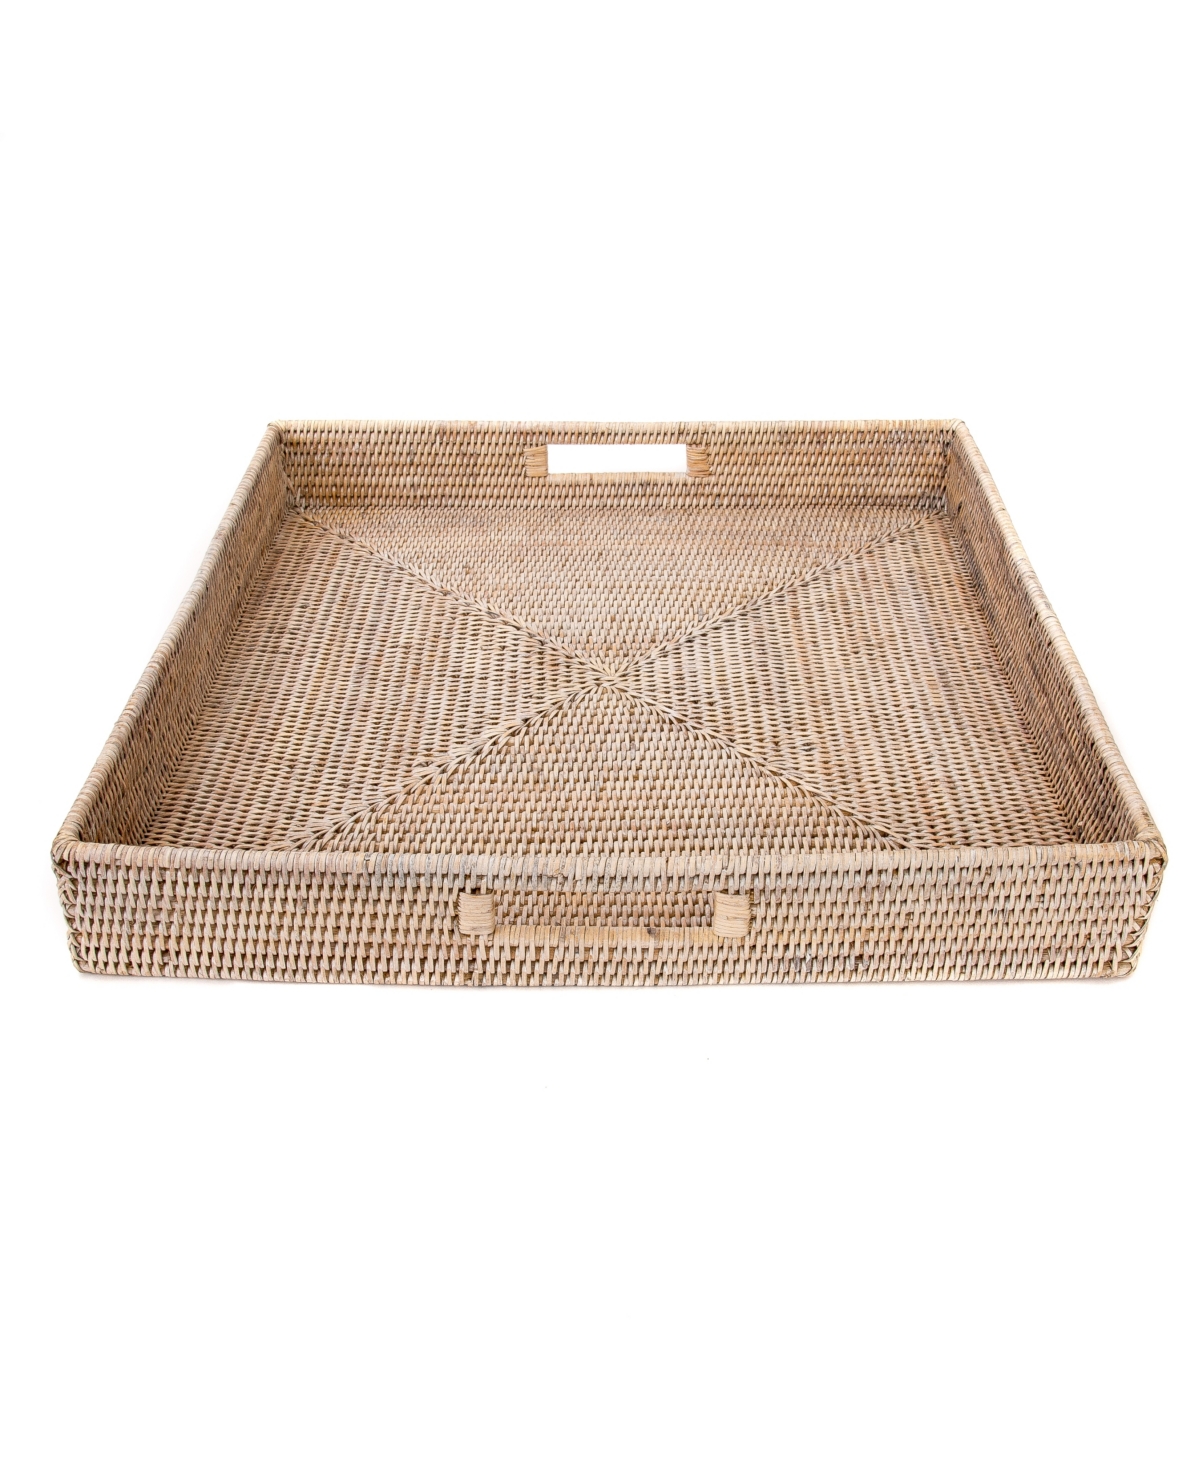 Shop Artifacts Trading Company Artifacts Rattan Square Ottoman Tray In Off-white